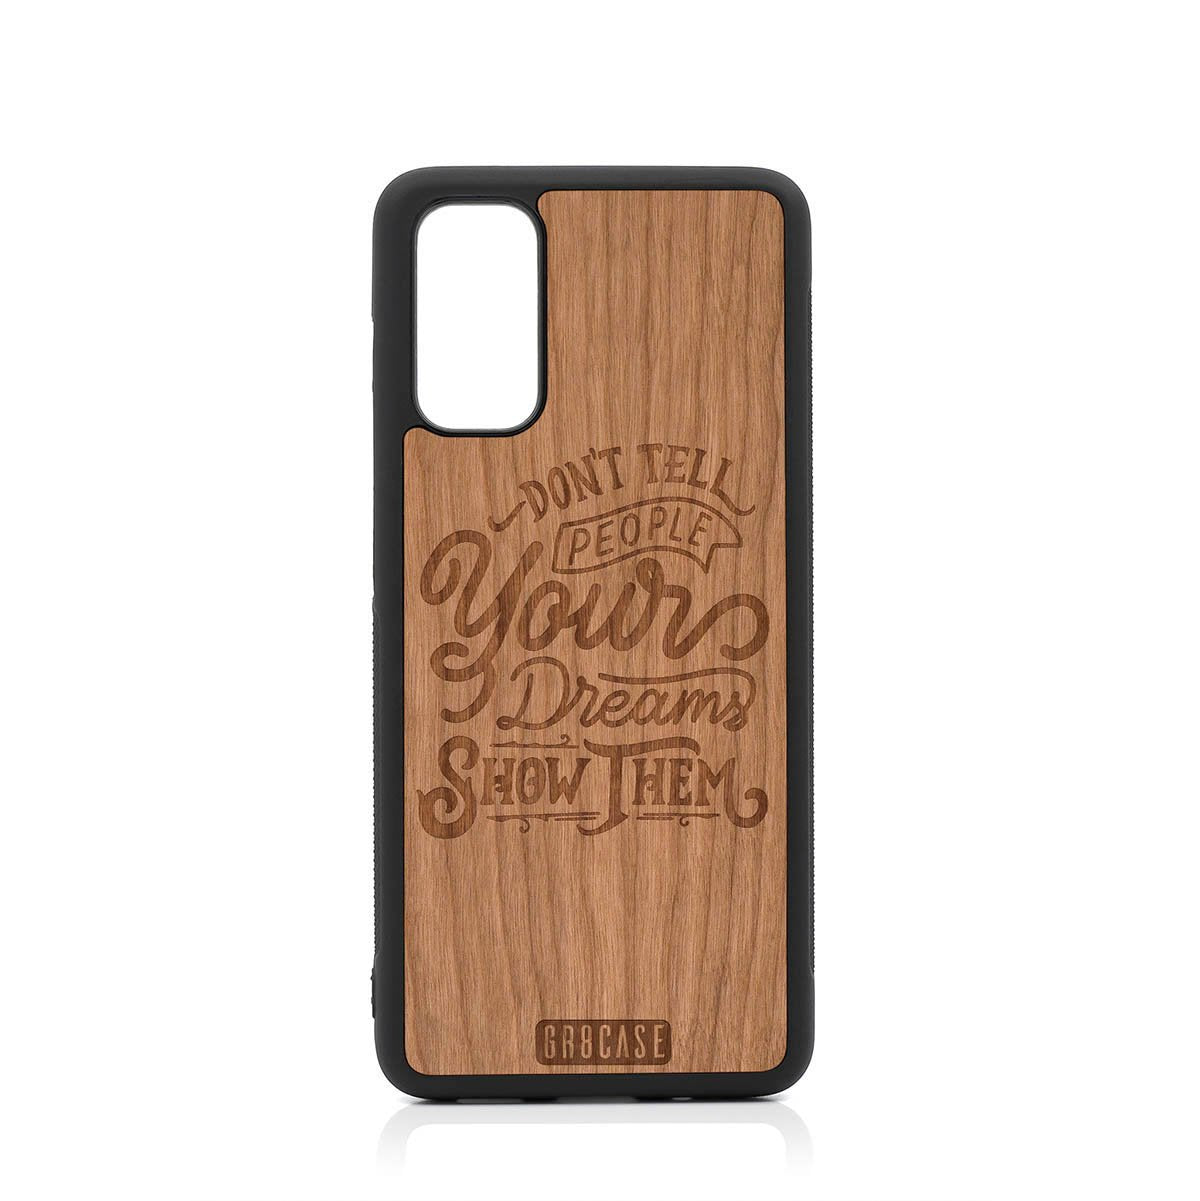 Don't Tell People Your Dreams Show Them Design Wood Case For Samsung Galaxy S20 FE 5G by GR8CASE